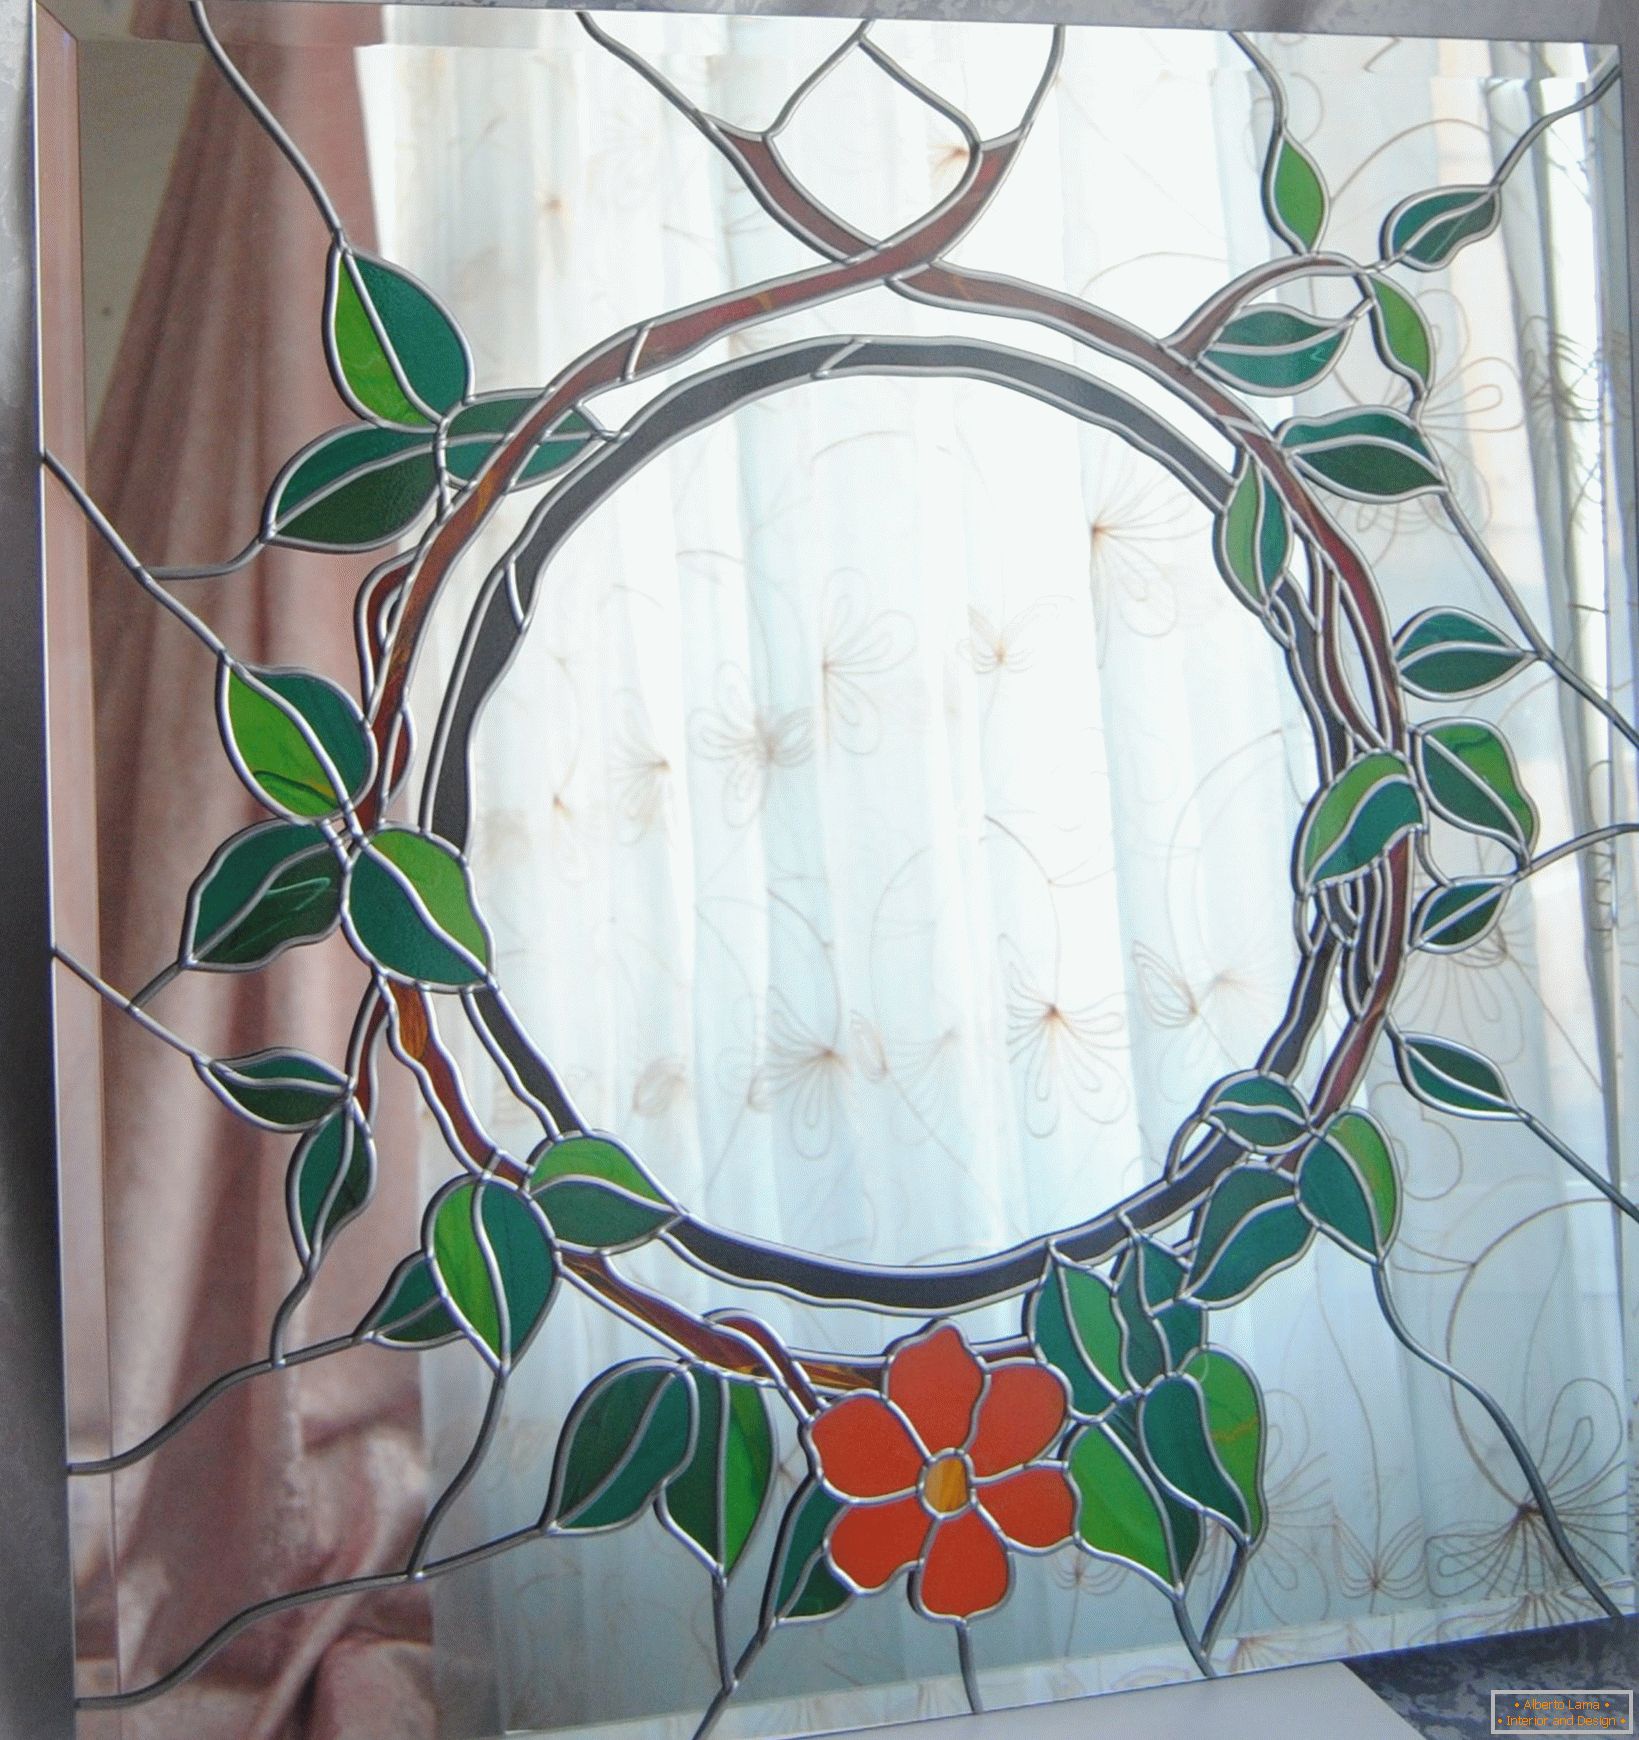 Flower and leaves on glass